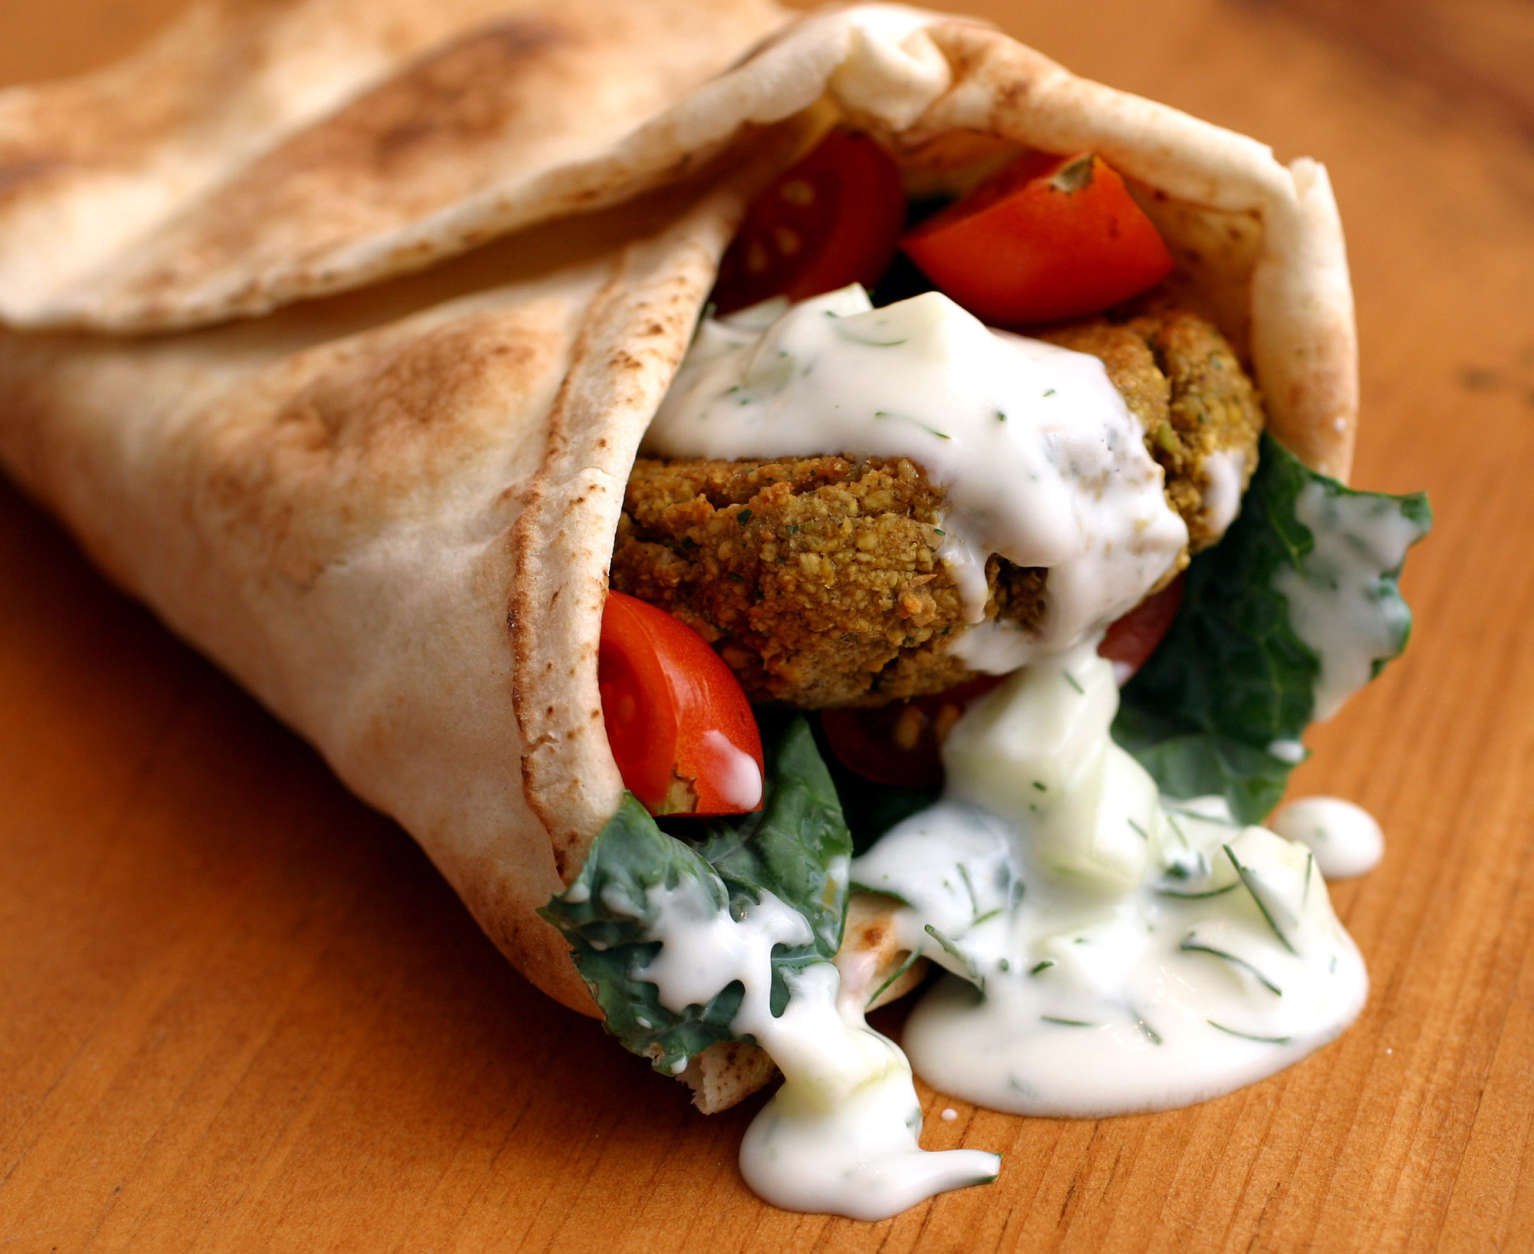 ** FOR USE WITH AP WEEKLY FEATURES **   The main course for a Greek-style vegetarian meal consists of a combination of falafel, strongly seasoned fried patties made from ground chickpeas, wrapped in a bed of greens and pita bread and doused with tzatziki yogurt sauce.  (AP Photo/Larry Crowe)